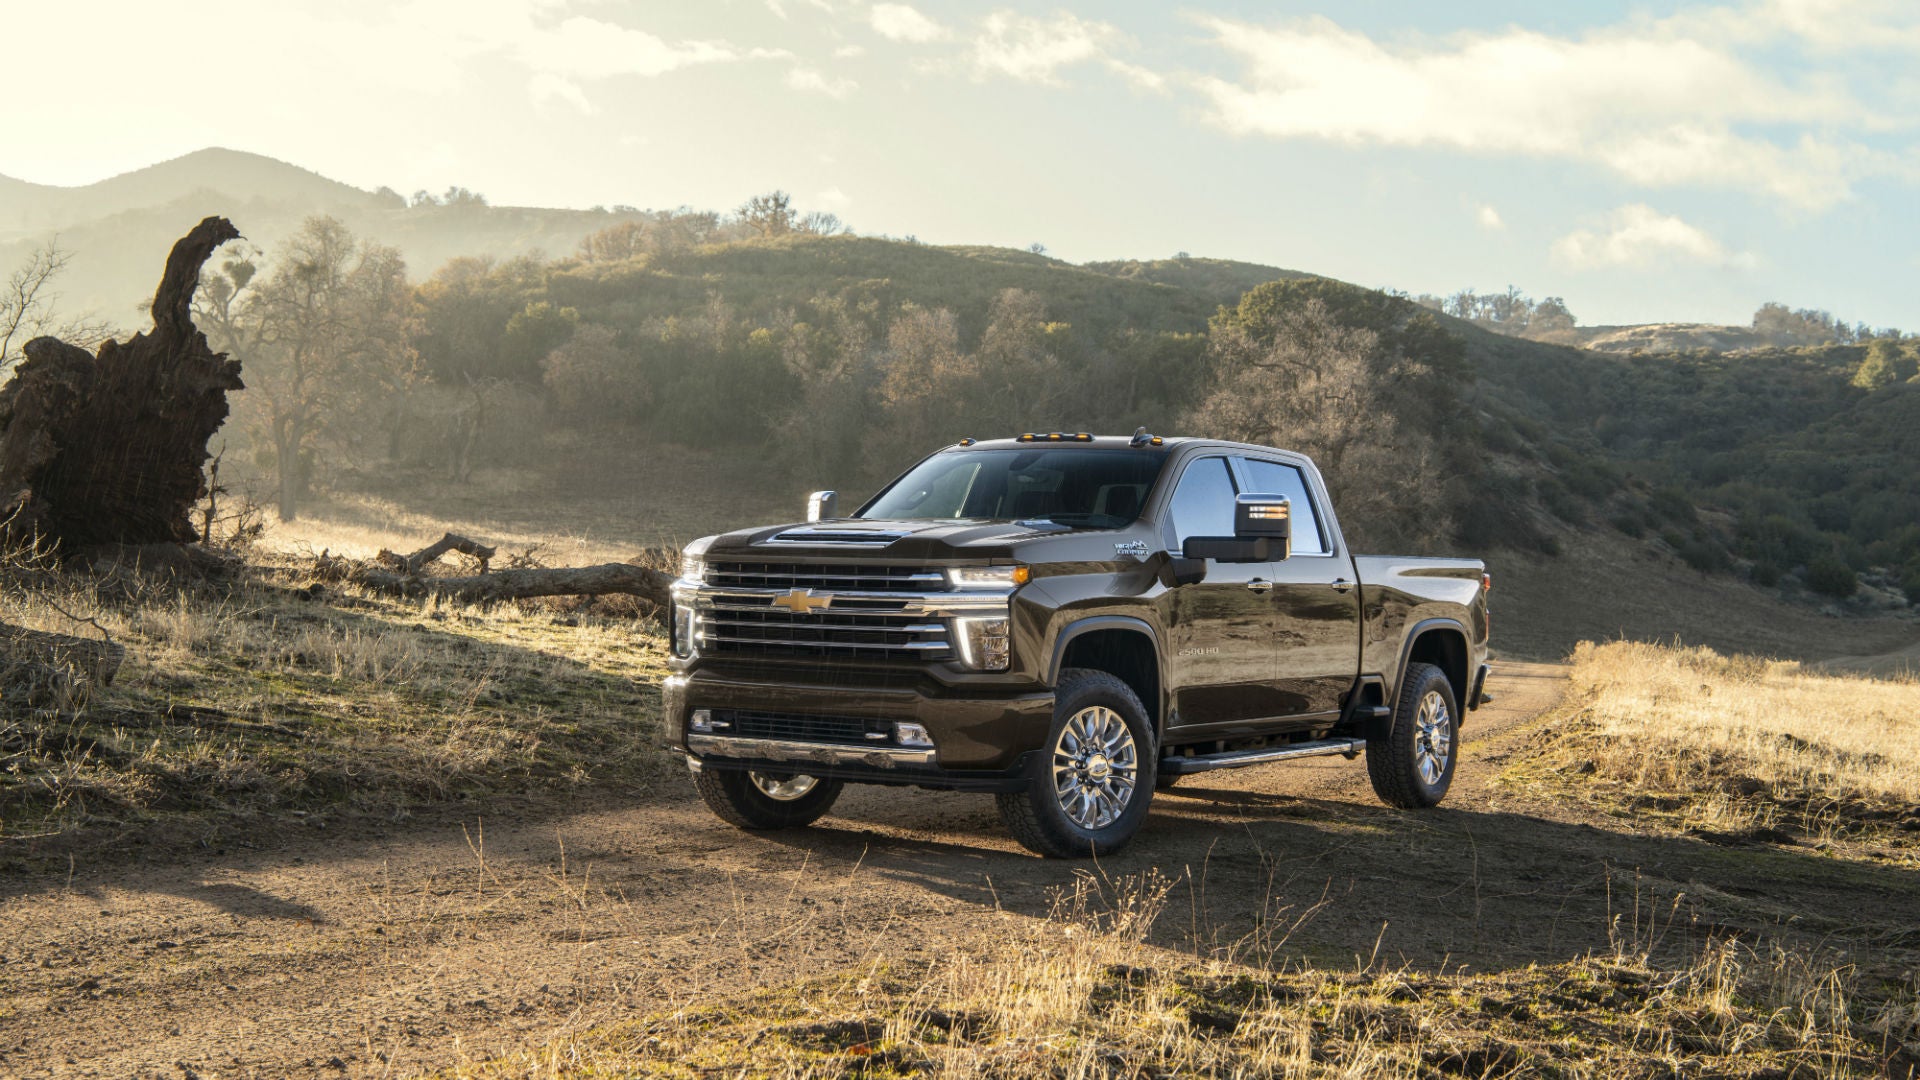 2020 Chevrolet Silverado HD: Less Power Than Ram or Ford, But Higher Towing Capacity